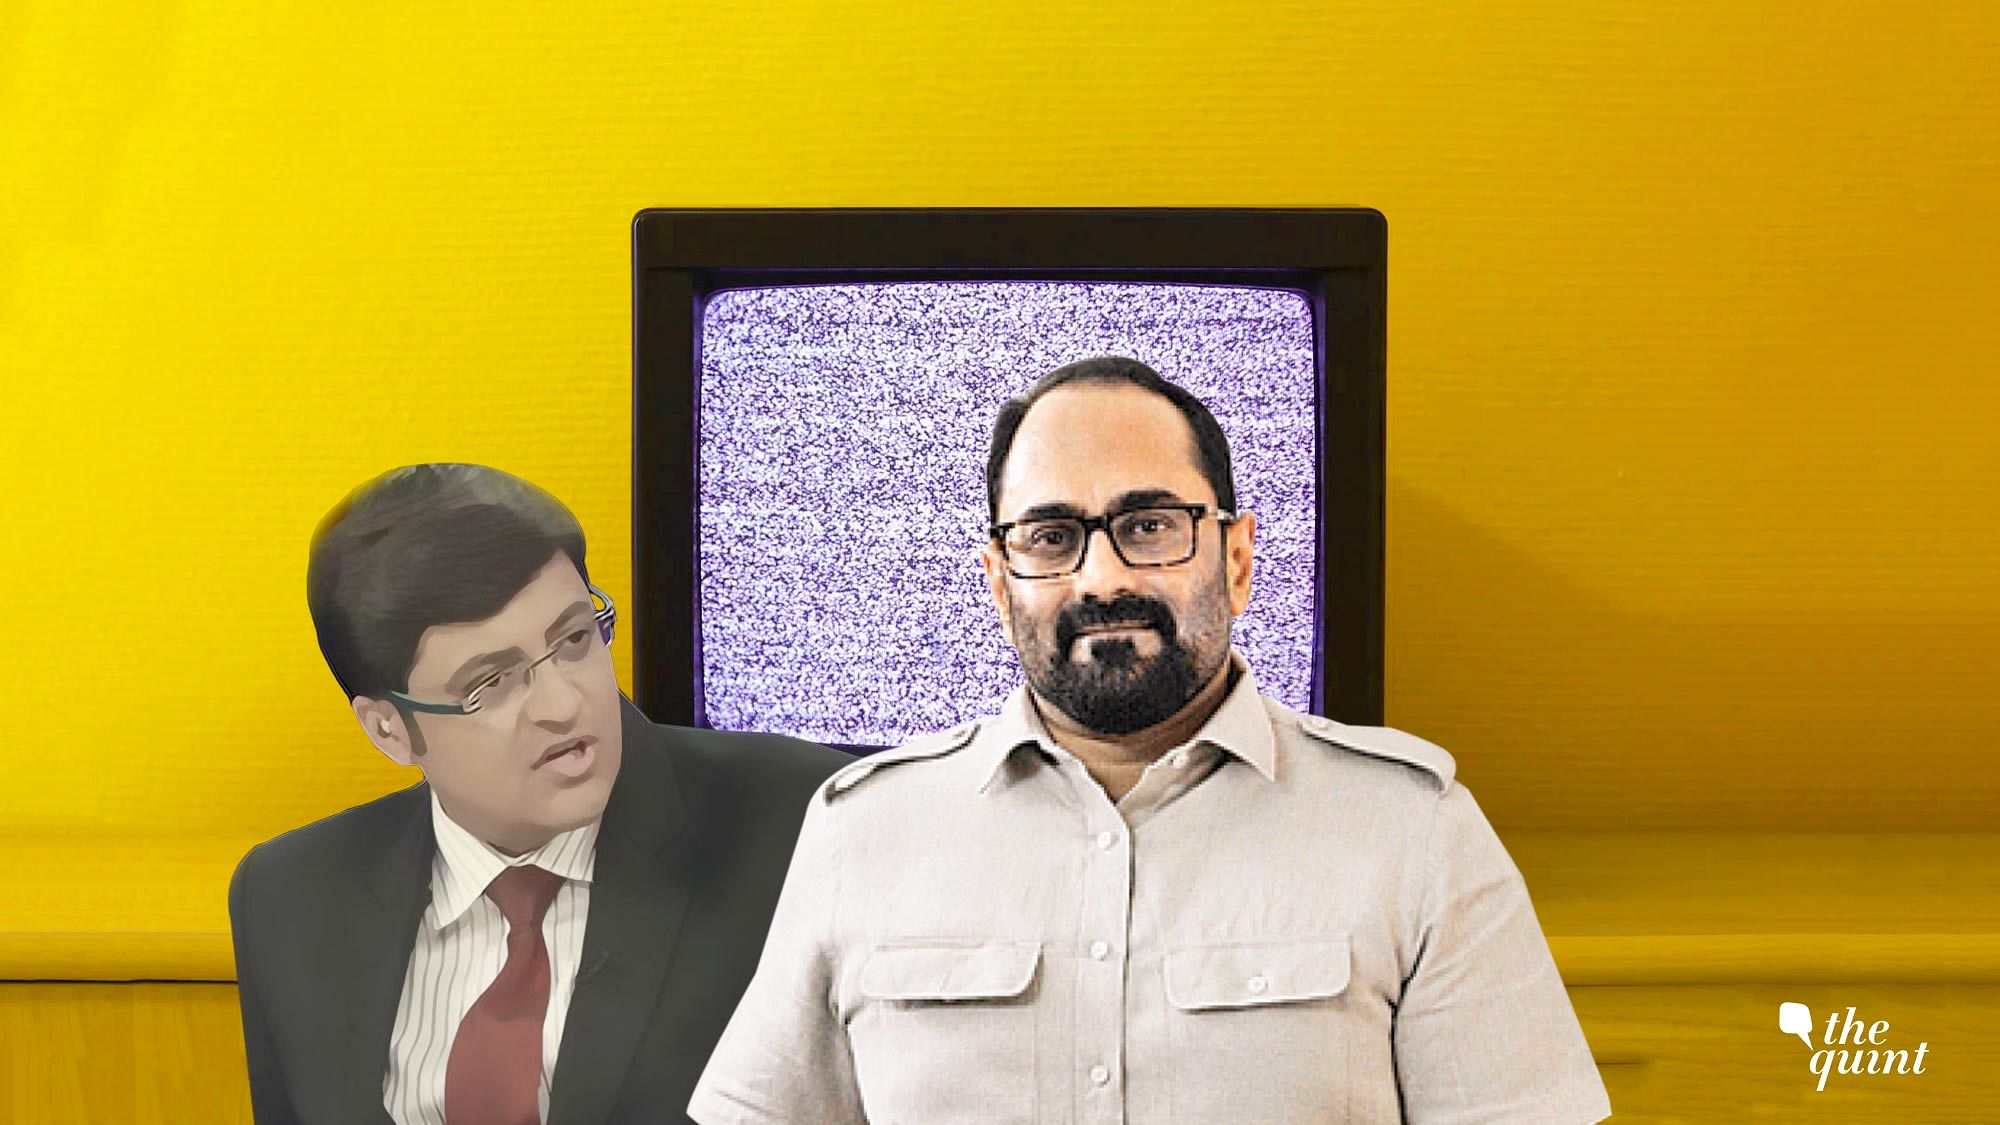 Rajeev Chandrasekhar announced his resignation from Republic TV’s board of directors on 2 April.